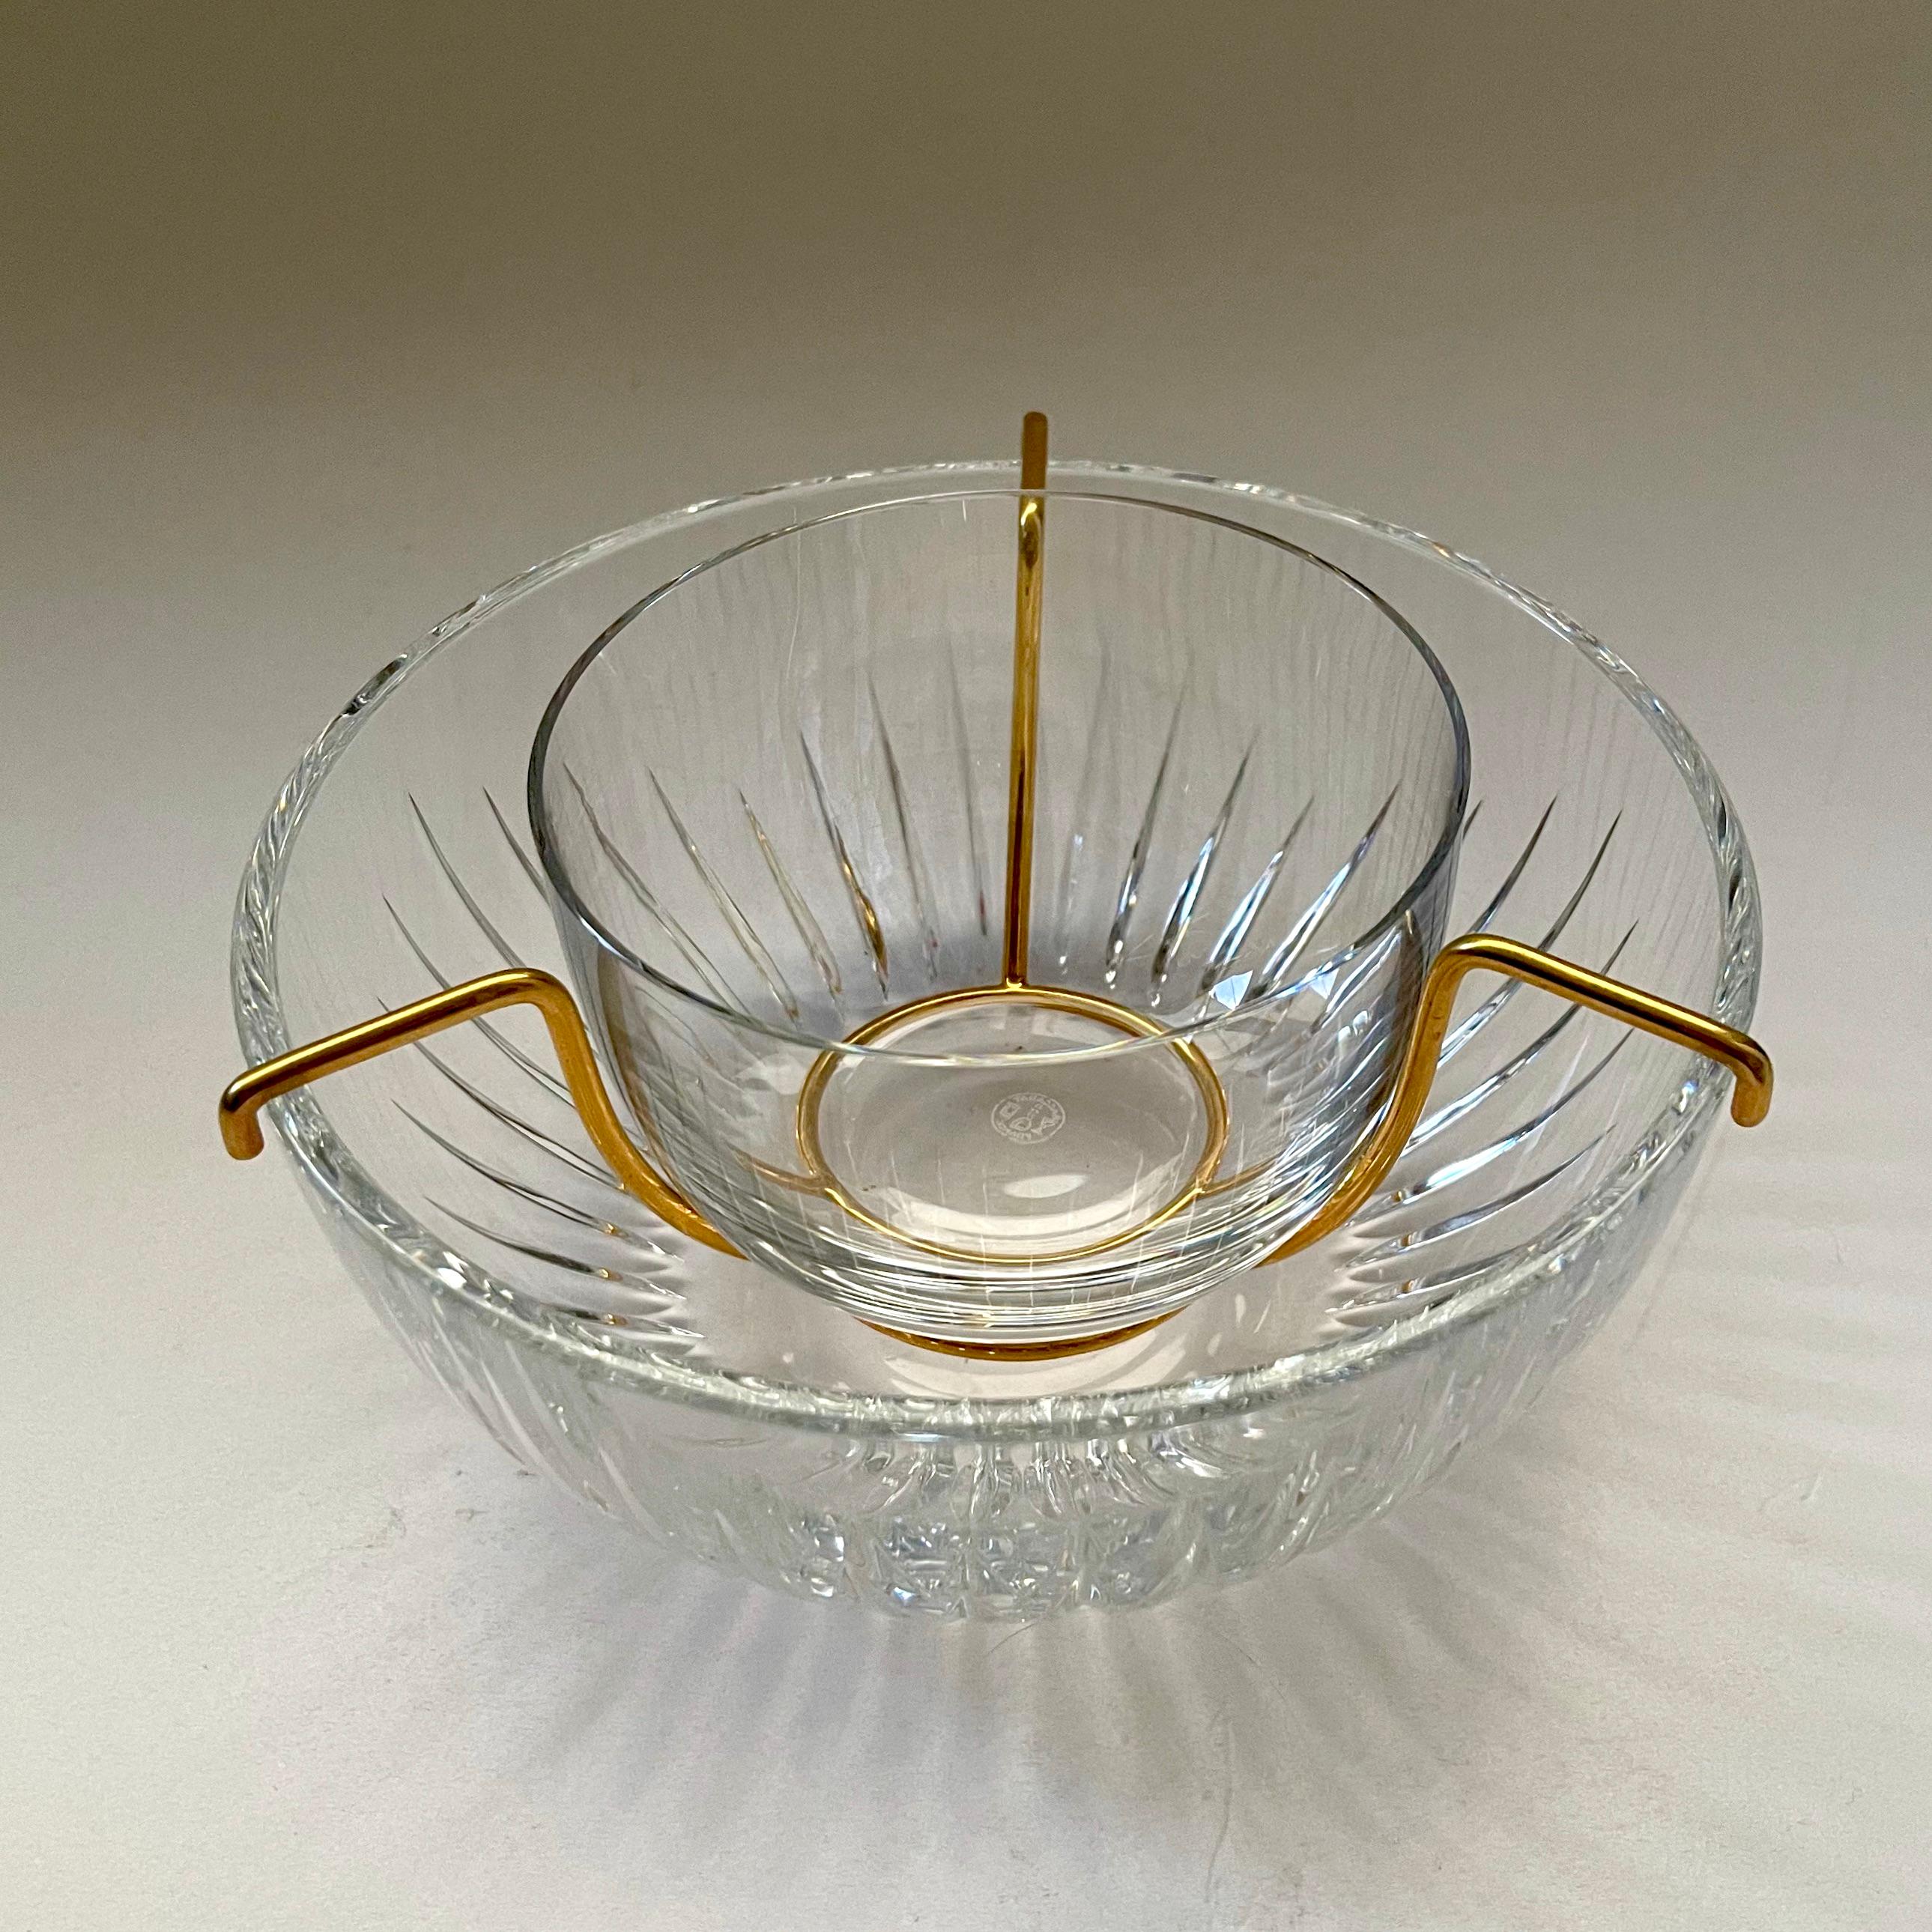 Baccarat crystal three piece caviar bowl from the Massena service. Consisting of two crystal bowls, one cut crystal the other plain nesting in a gilt metal frame. Signed Baccarat to base.